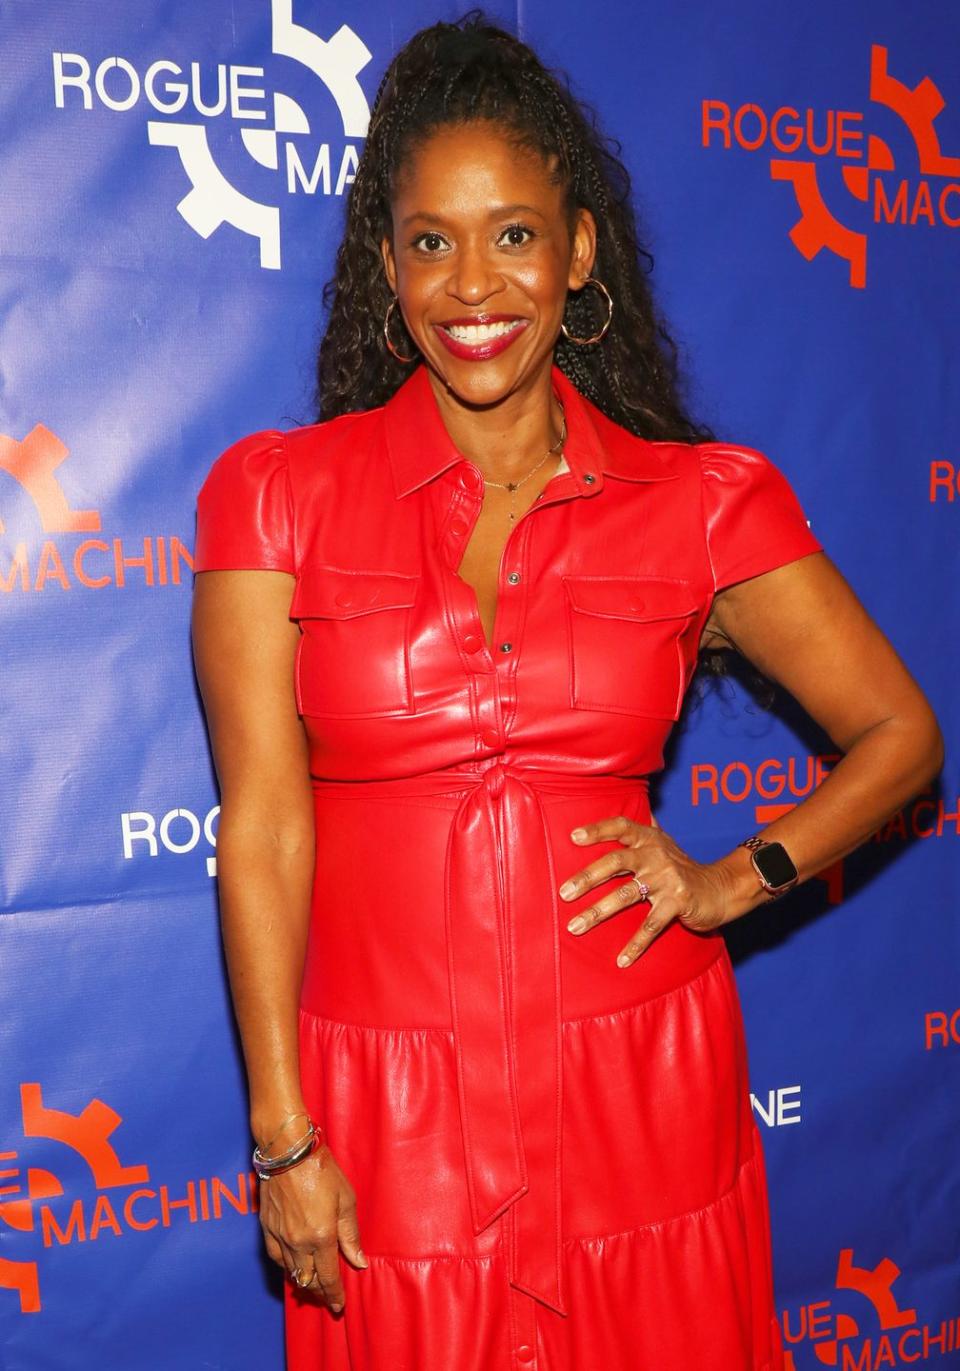 merrin dungey smiles for the camera in a red leather shirt dress and gold hopped earrings